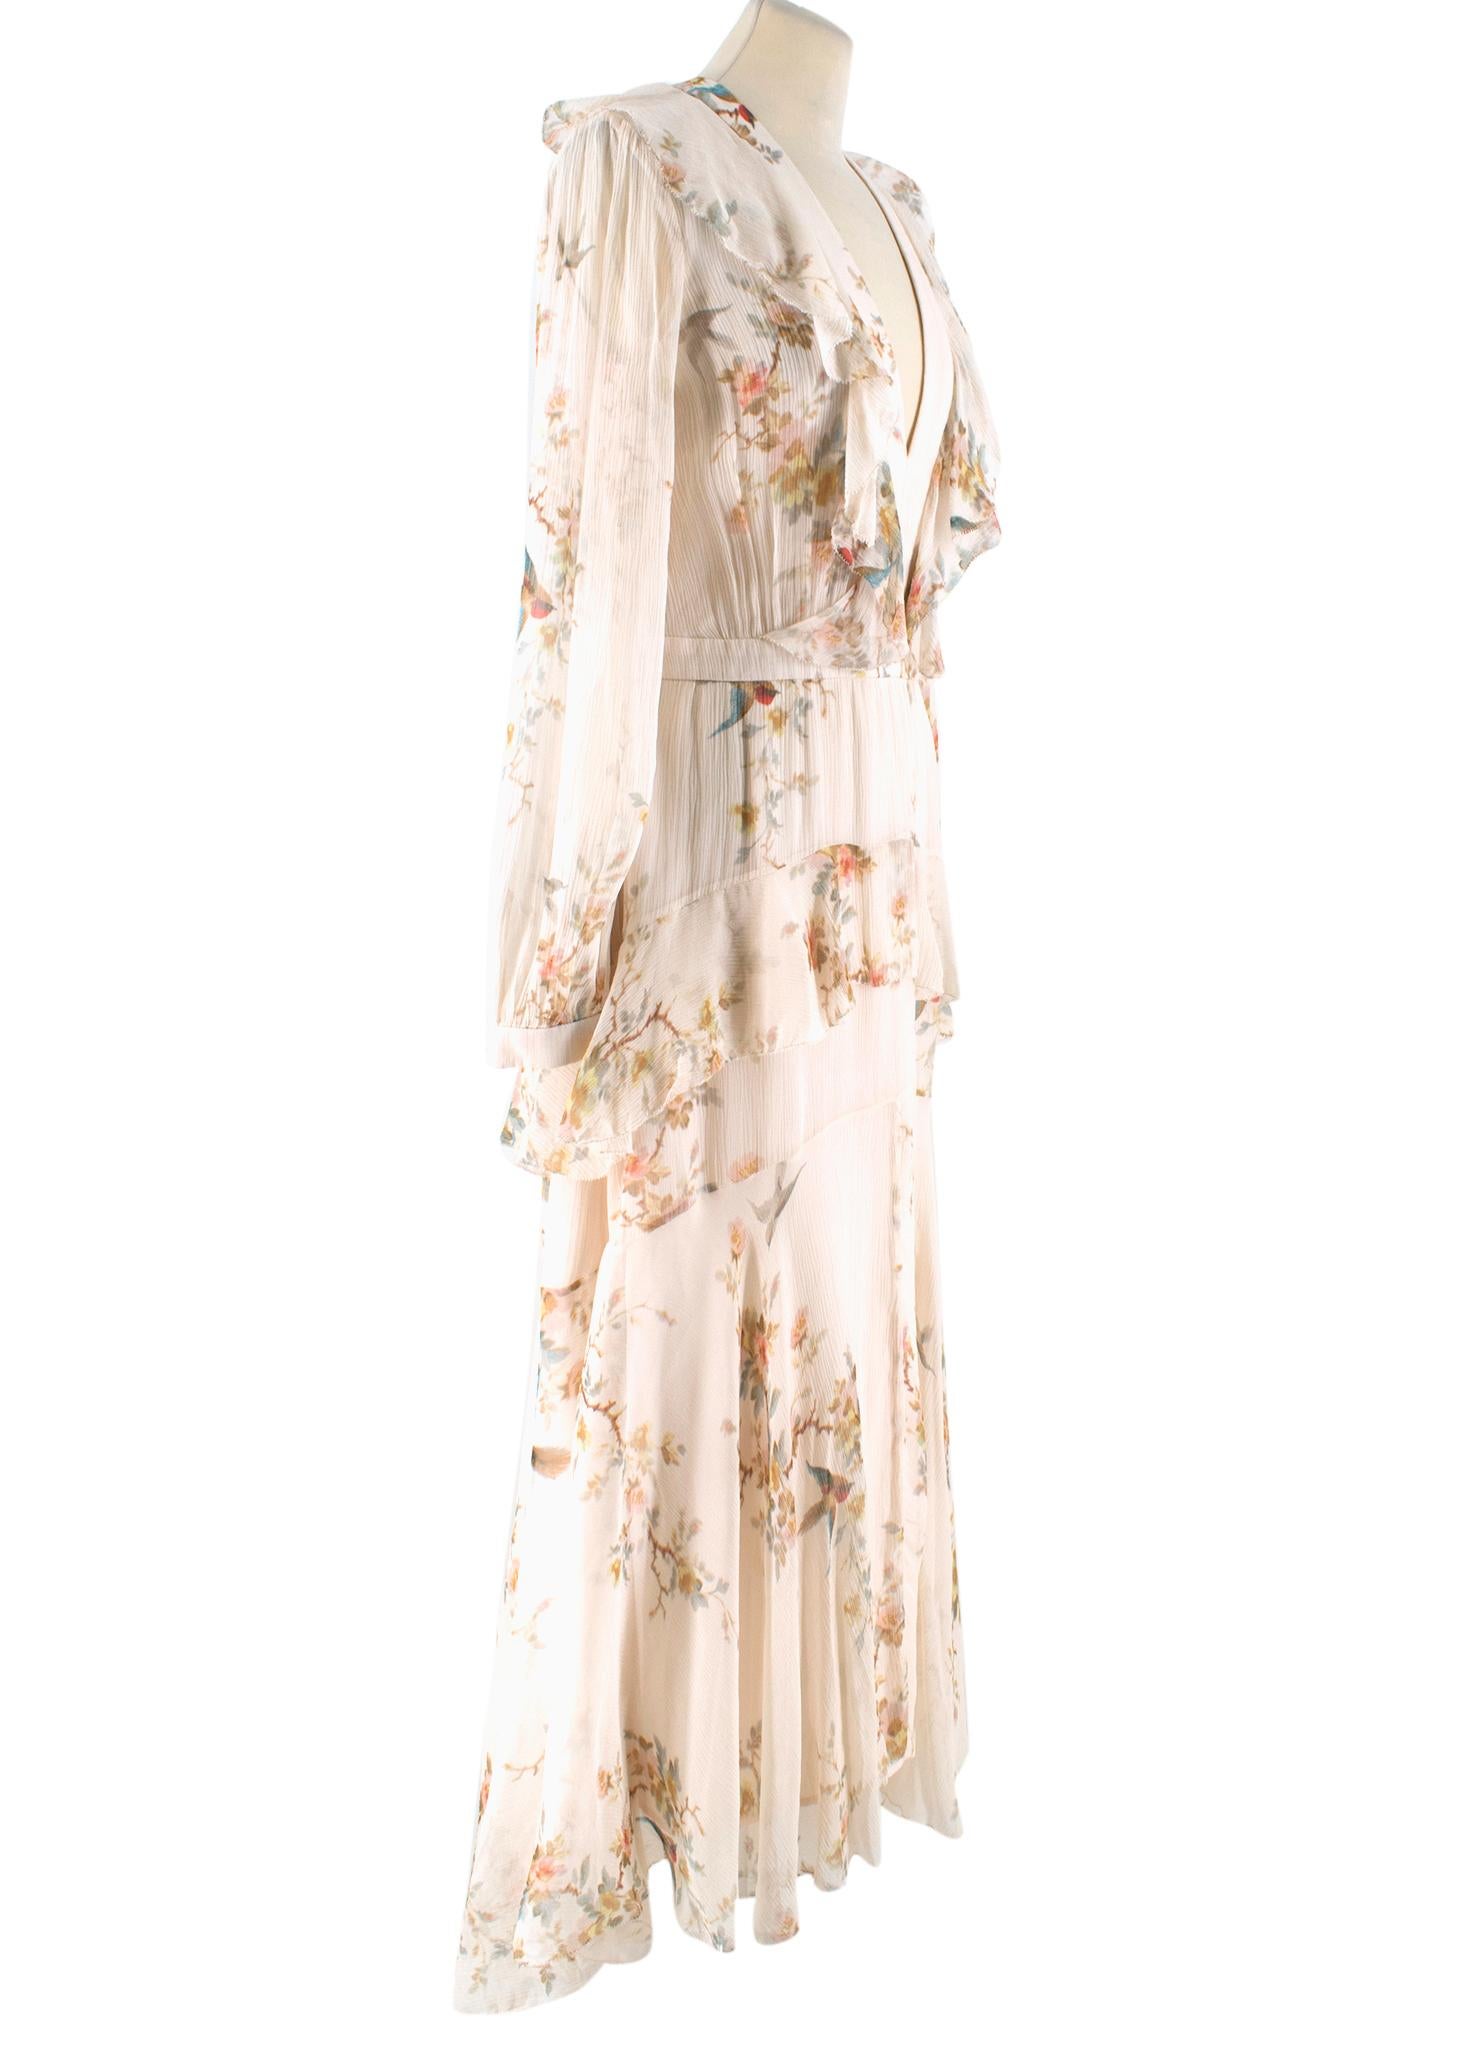 Zimmermann Floral-print Ruffled Silk Maxi Dress

- Beige floral print silk maxi dress
- Lightweight
- Ruffled-trimmed
- Plunging v-neck
- Long sheer sleeves, buttoned cuffs 
- Centre-back hook-and-eye and zip fastening
- Ruched waist
- Flowy skirt